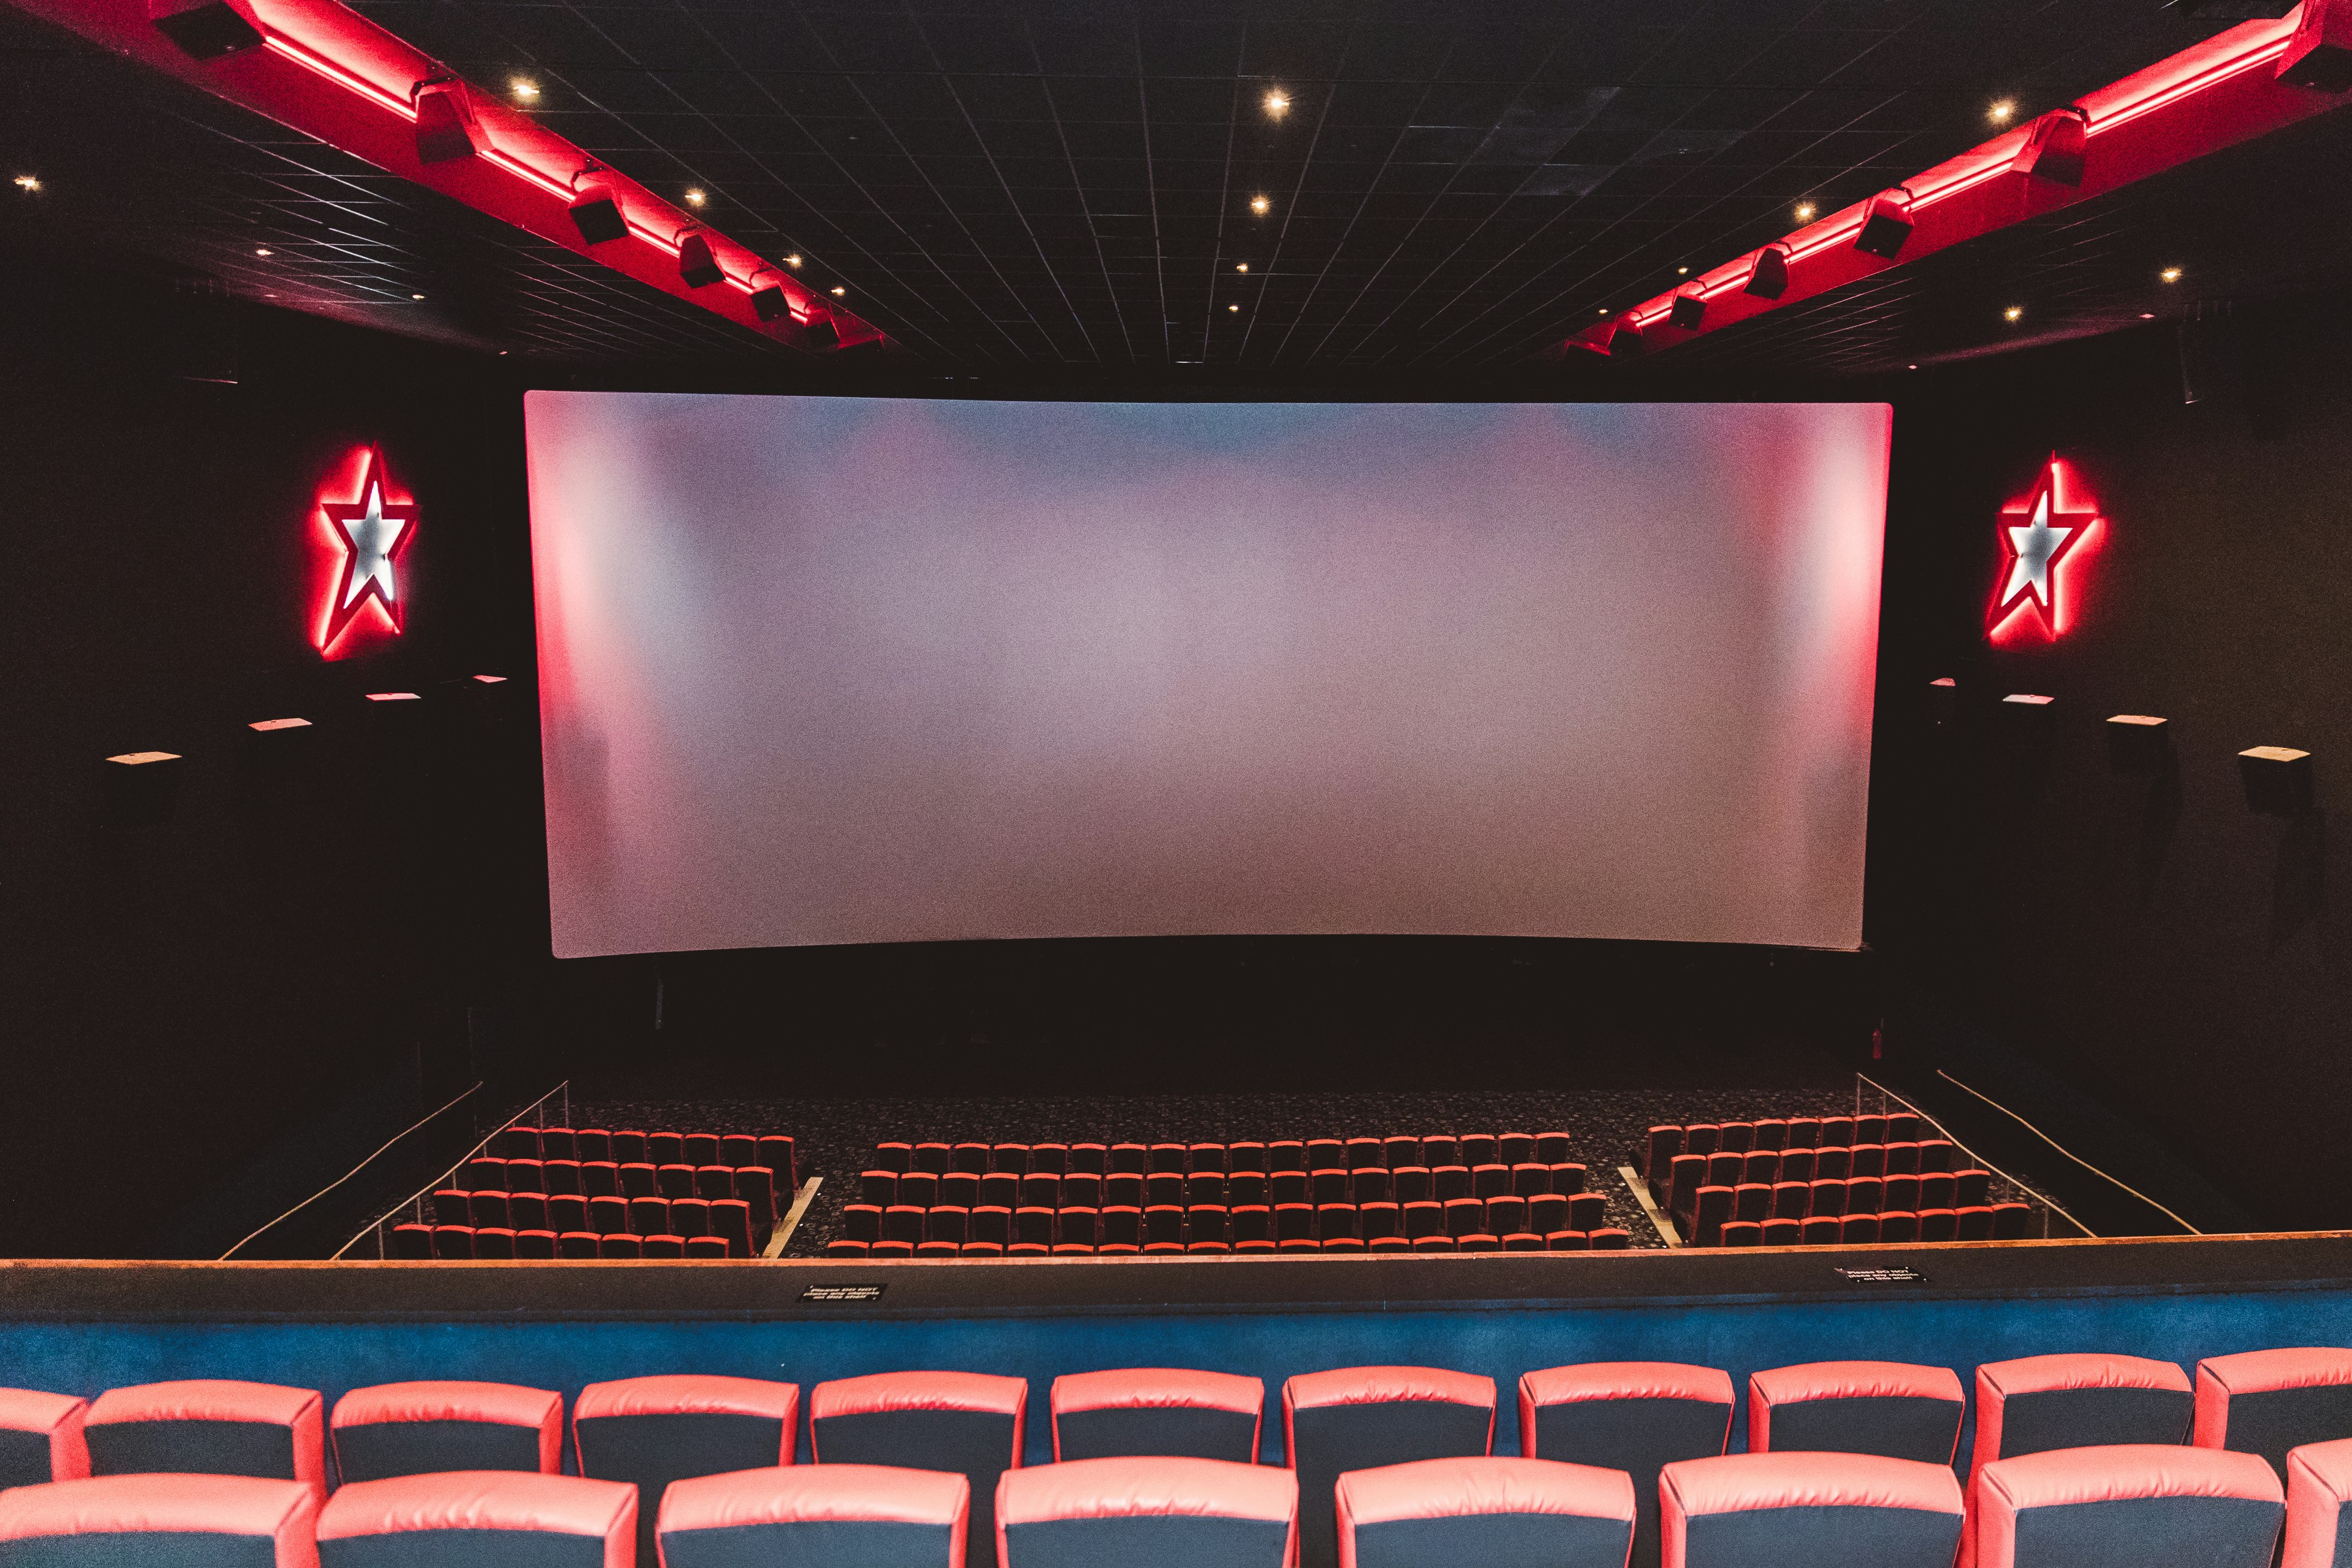 Cineworld Leicester Square - Superscreen image 1